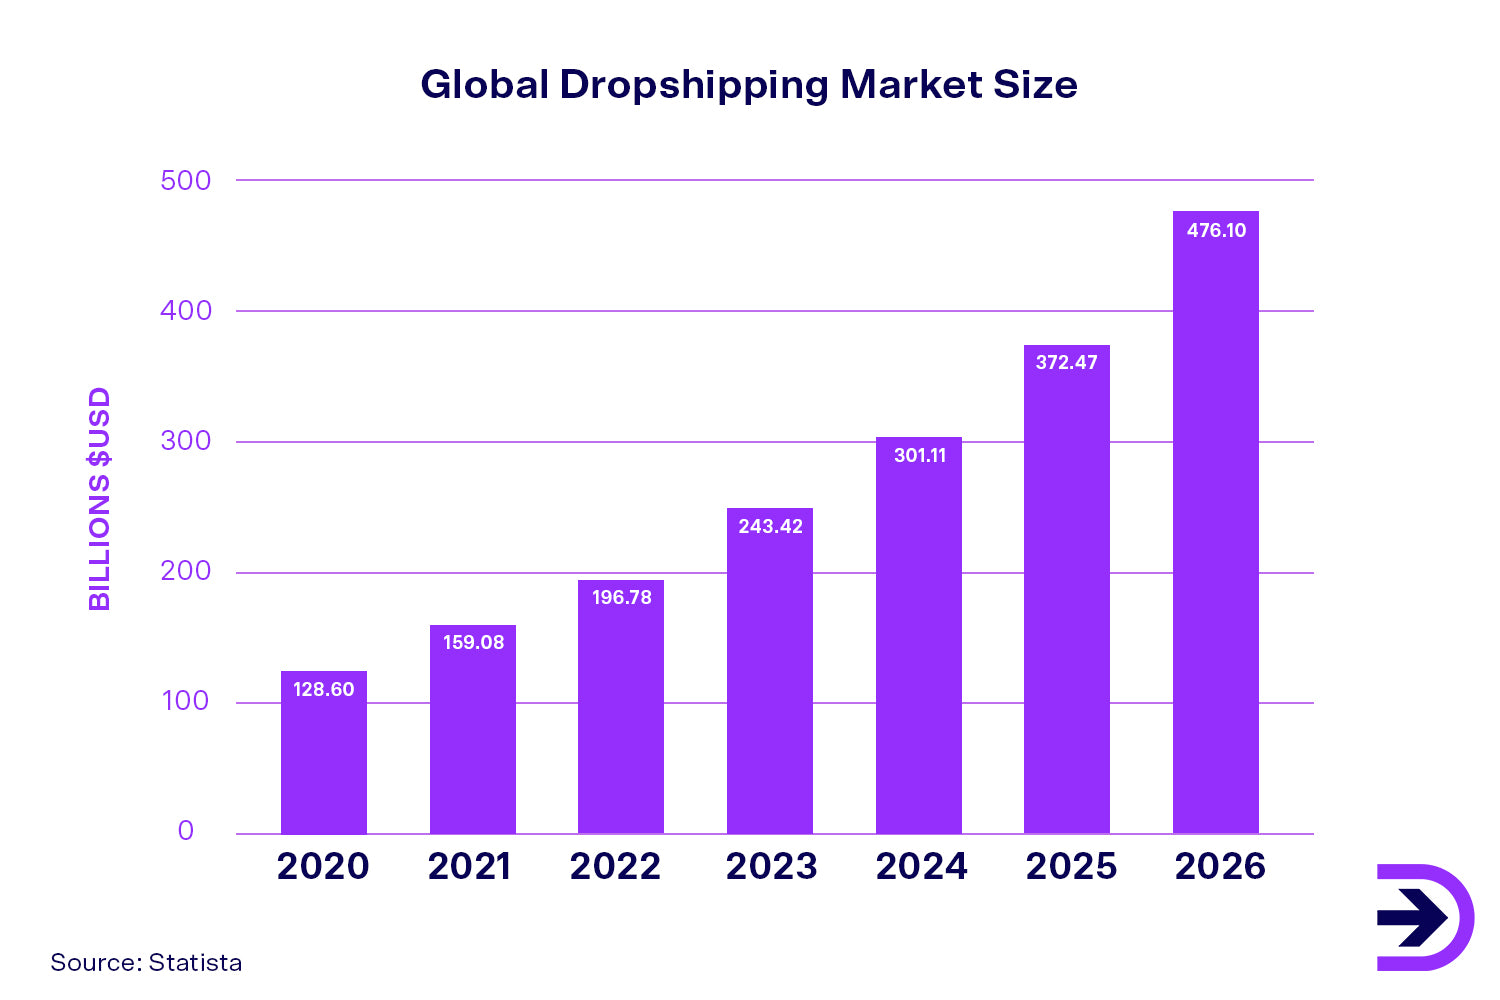 As the global dropshipping market increases, more companies are adopting the fulfillment method as their preferred way to reach more customers.